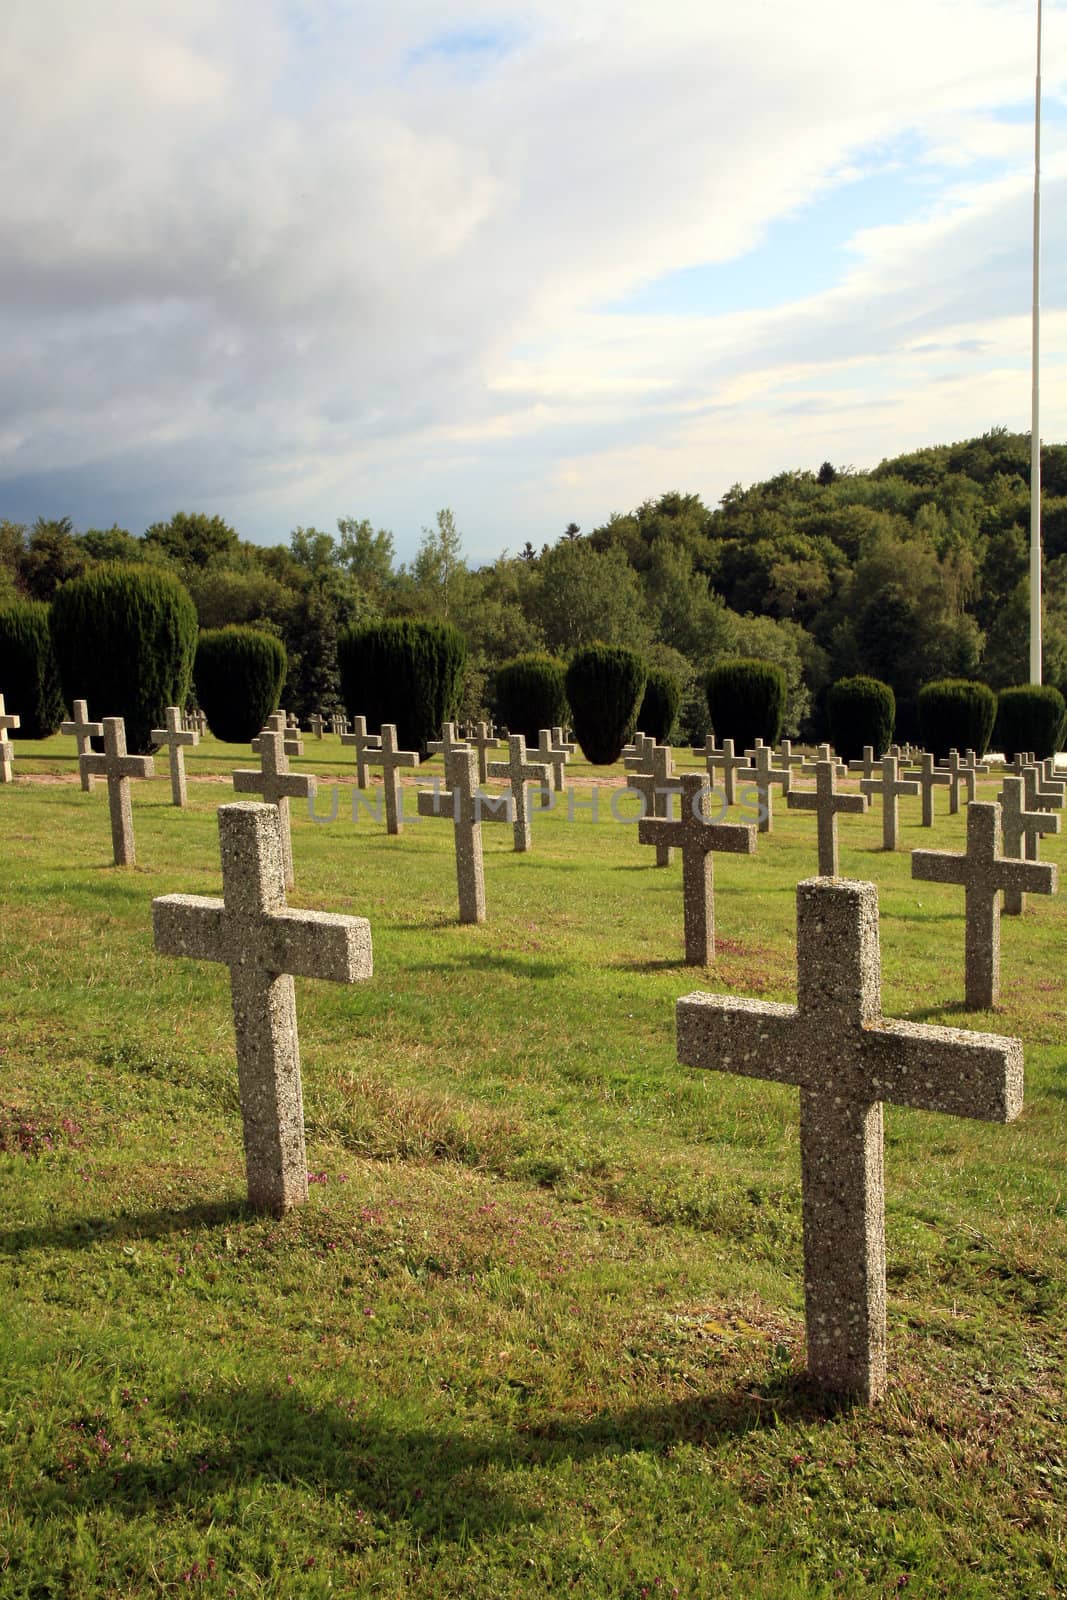 Military graveyard of heroes of the First World War - France, Alsace, Vosges